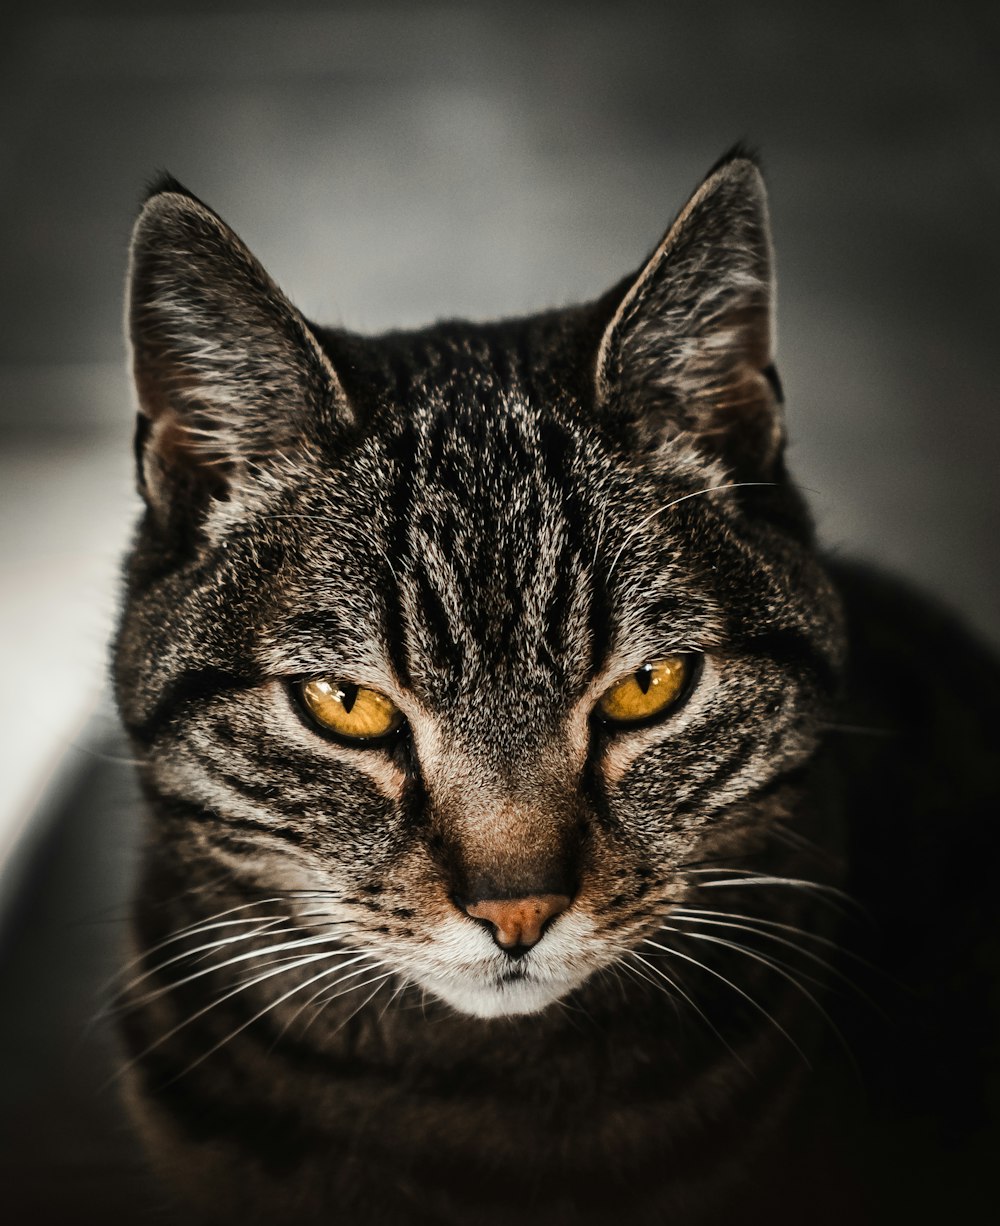 macro photography of brown tabby cat